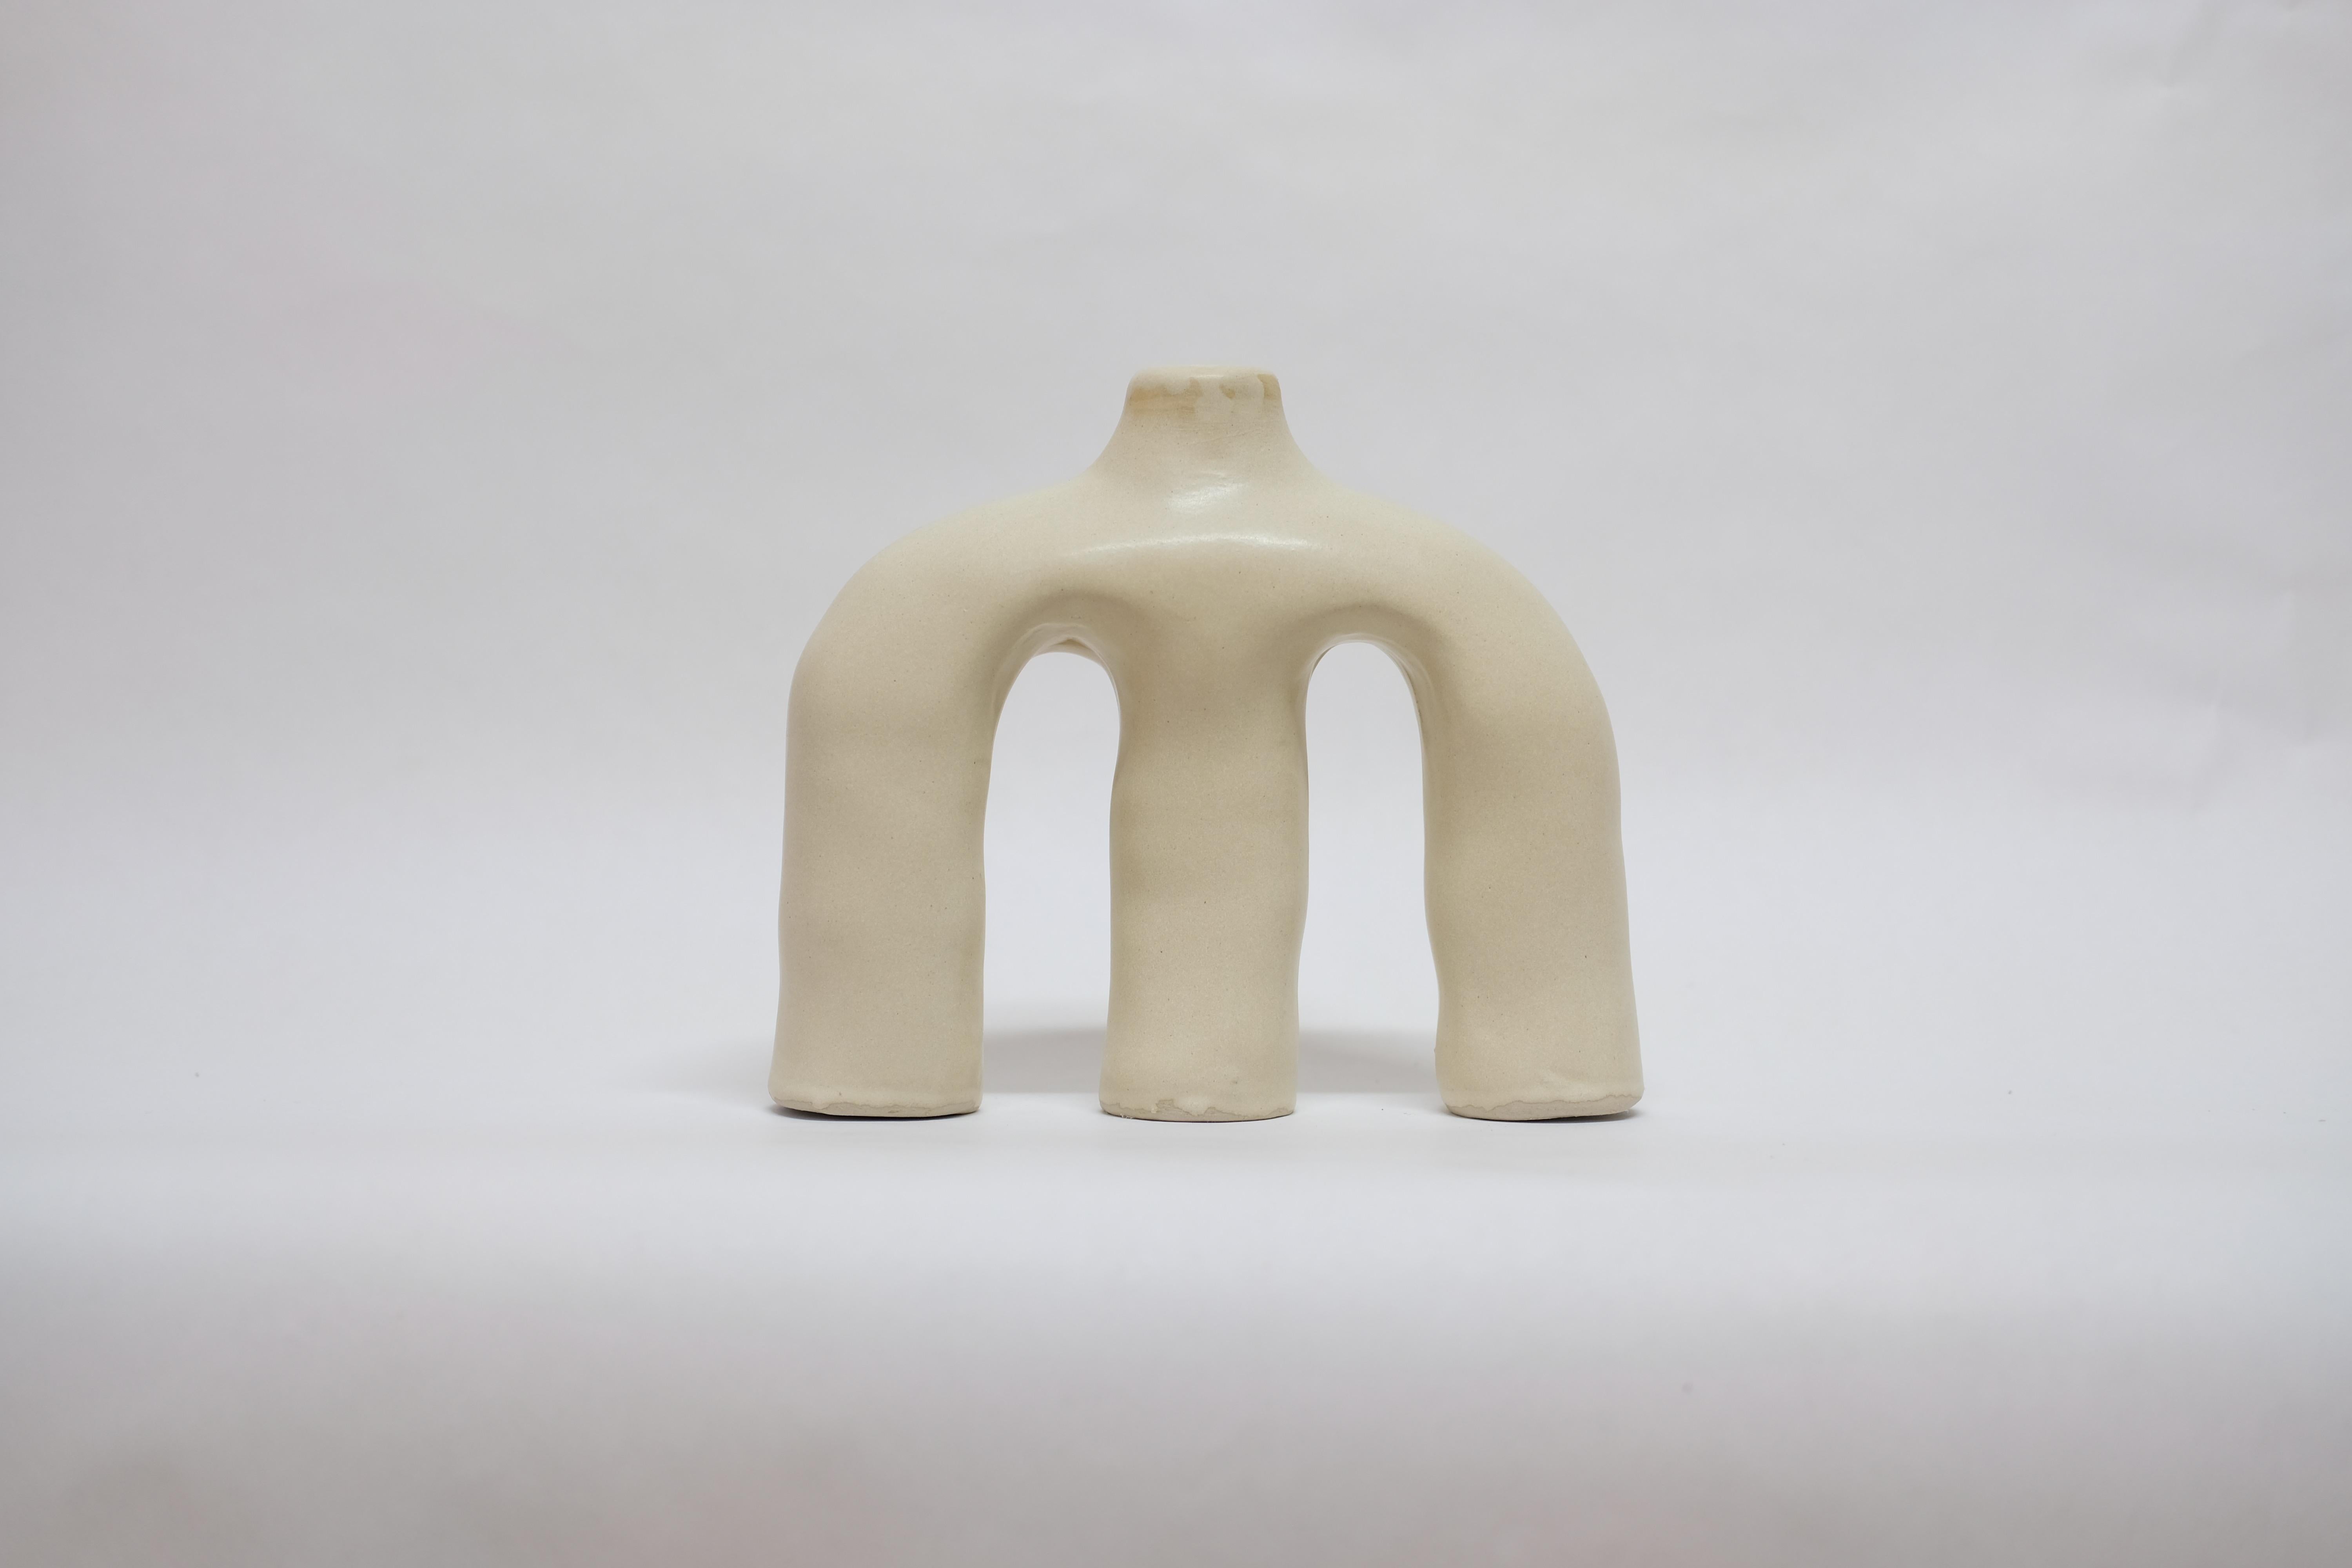 Anatomía sutil stoneware vase by Camila Apaez
One of a kind
Materials: Stoneware
Dimensions: 25 x 8 x 22 cm
Options: White Bone, Butter milk, Charcoal Black, please contact us

This year has been shaped by the topographies of our homes and the